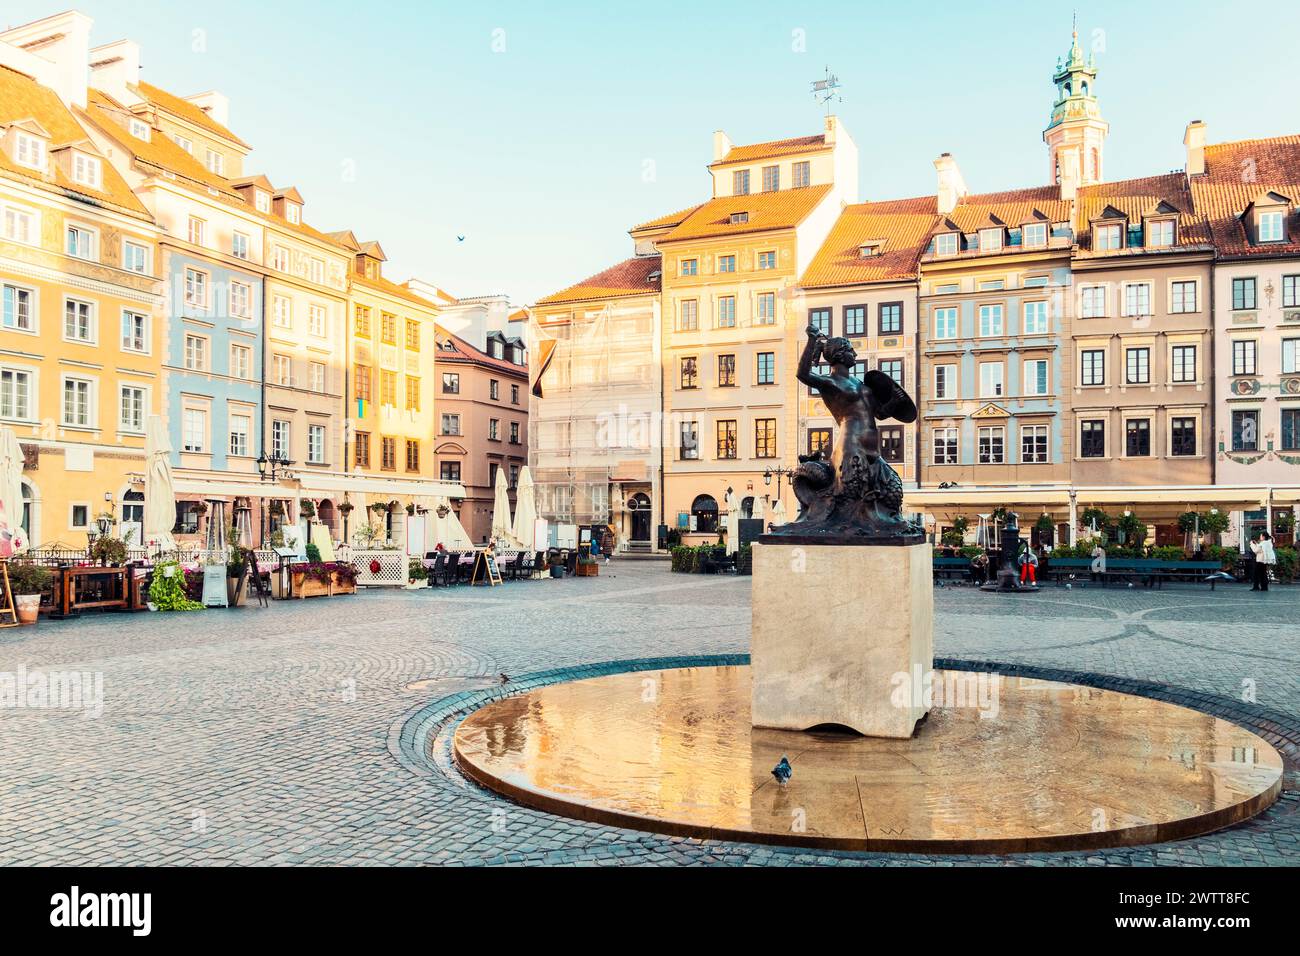 Famous Mermaid statue with historic colorful houses at Old Town Market Square, Warsaw, Poland Stock Photo